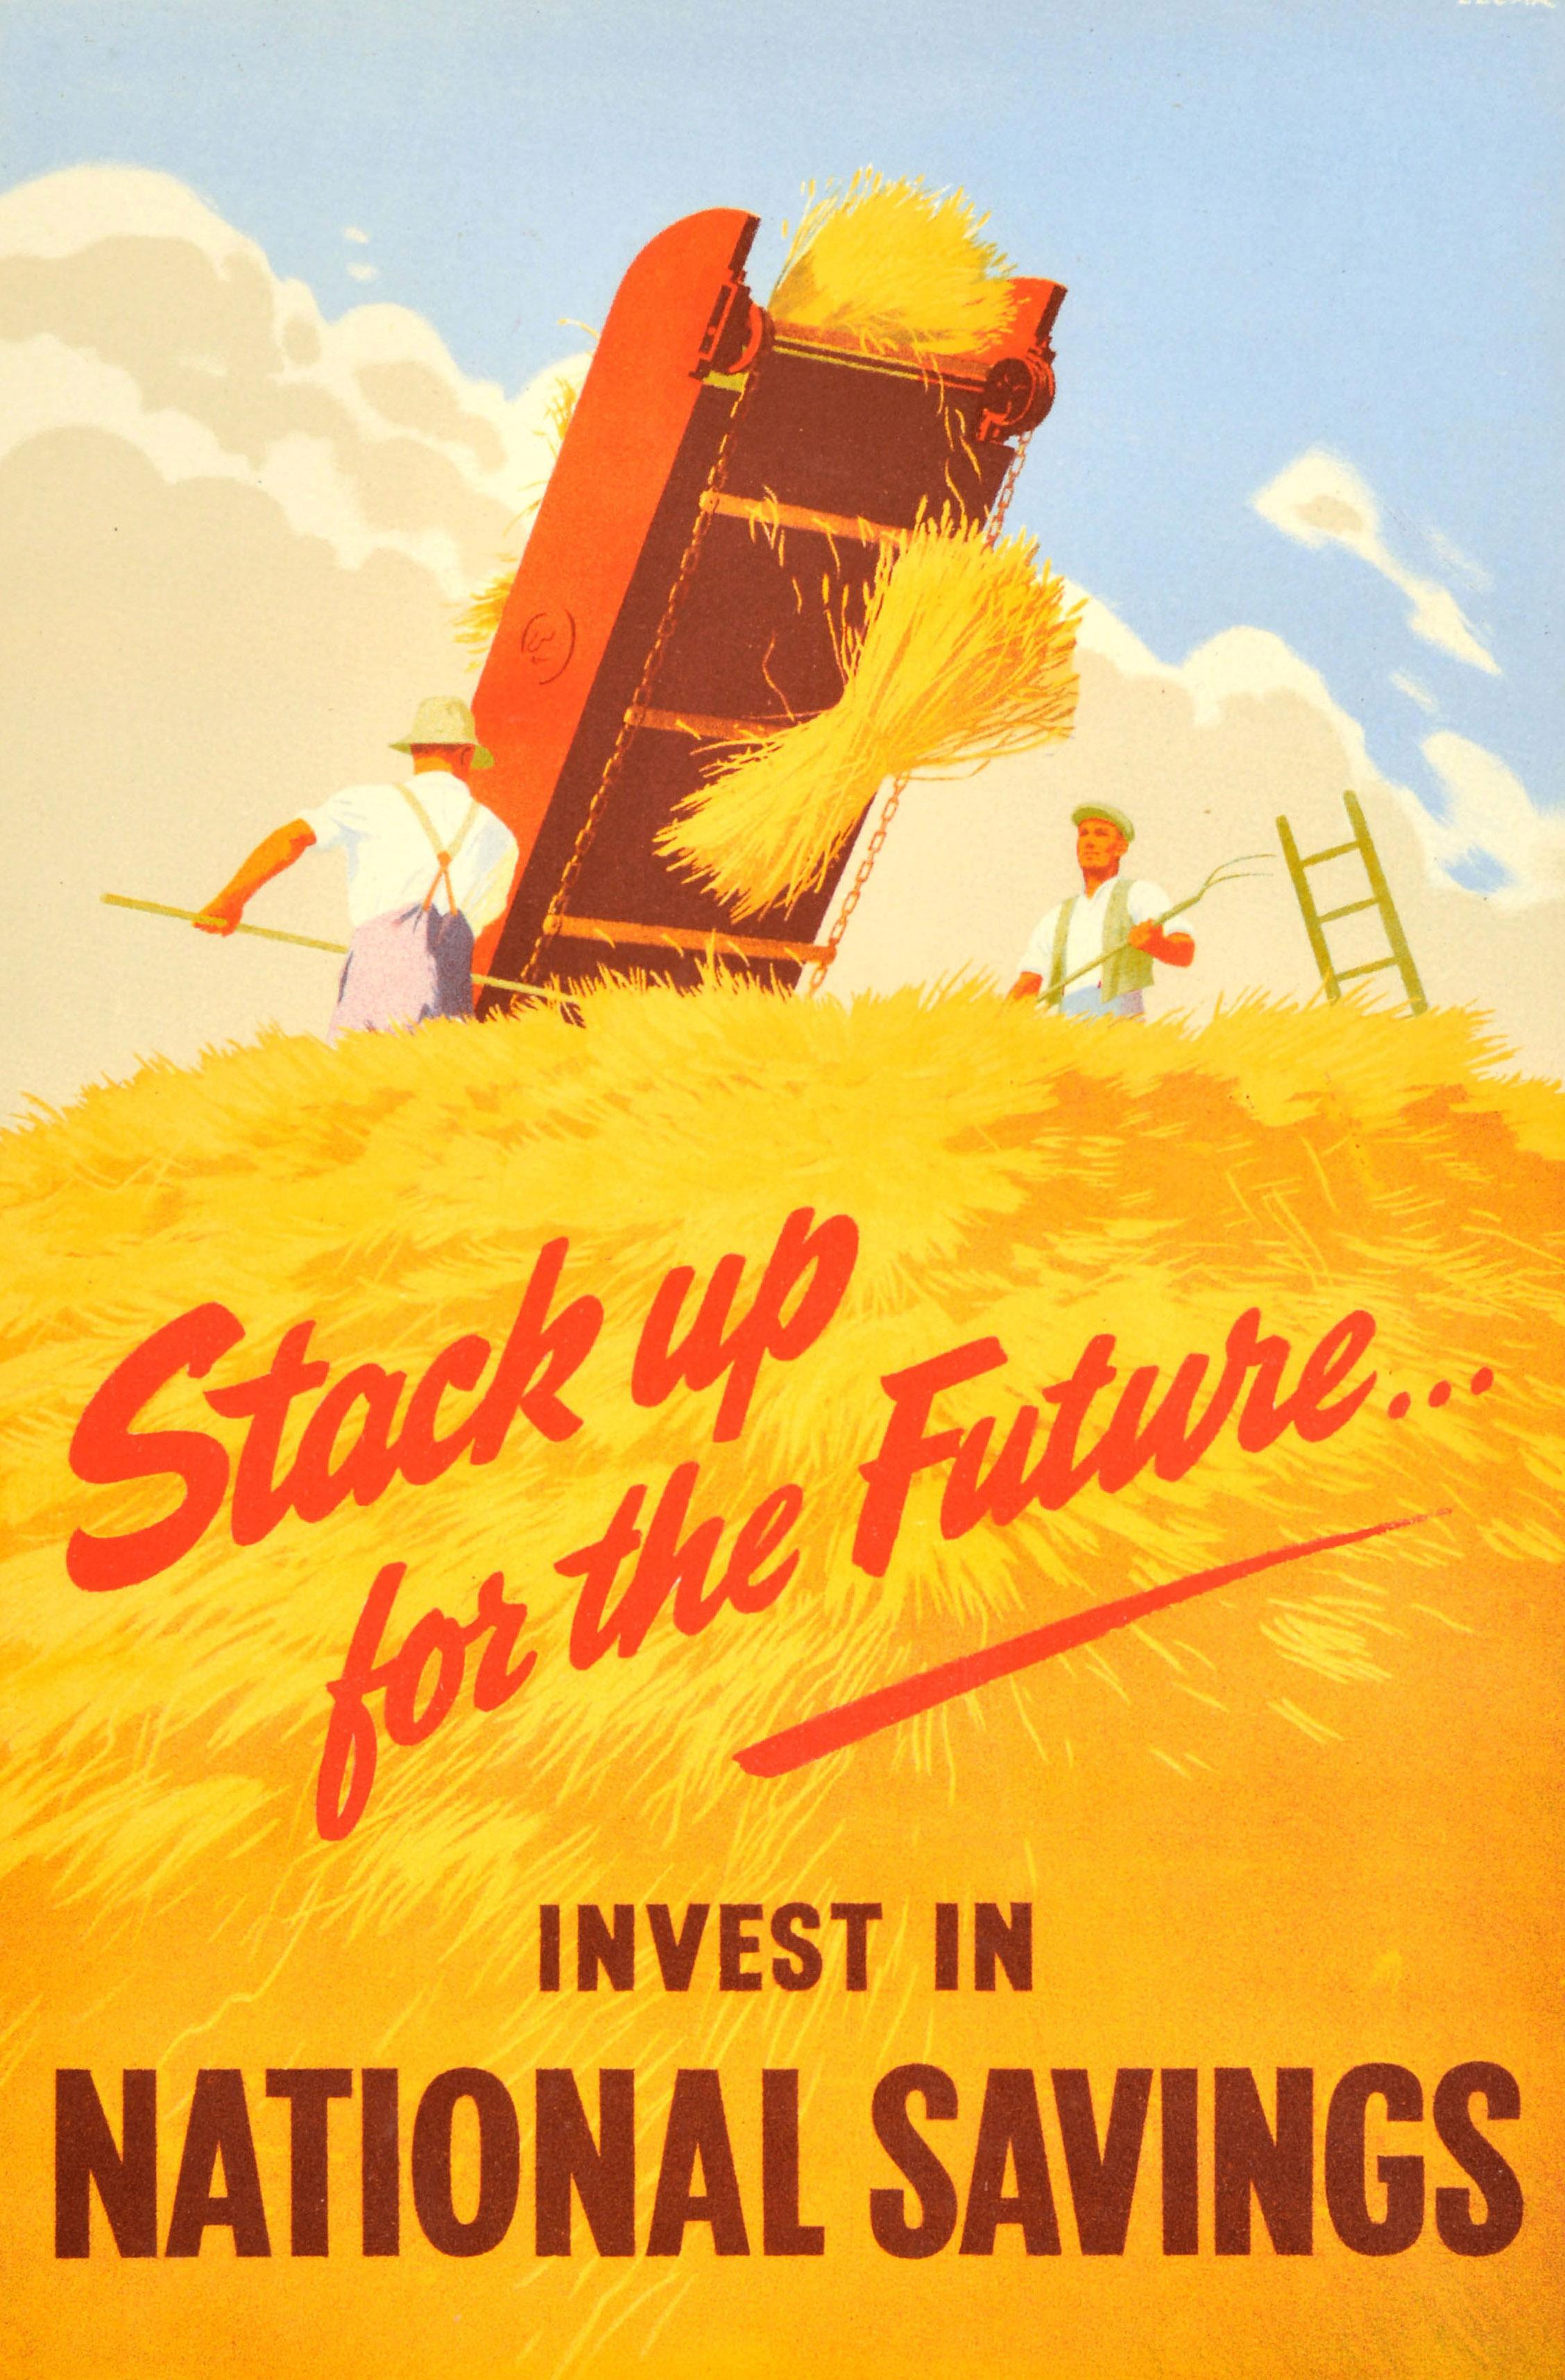 Original vintage advertising poster - Stack up for the Future... Invest in National Savings - featuring an illustration of farm workers stacking up hay in front of the blue sky with the bold stylised text across the image and below. Issued by the